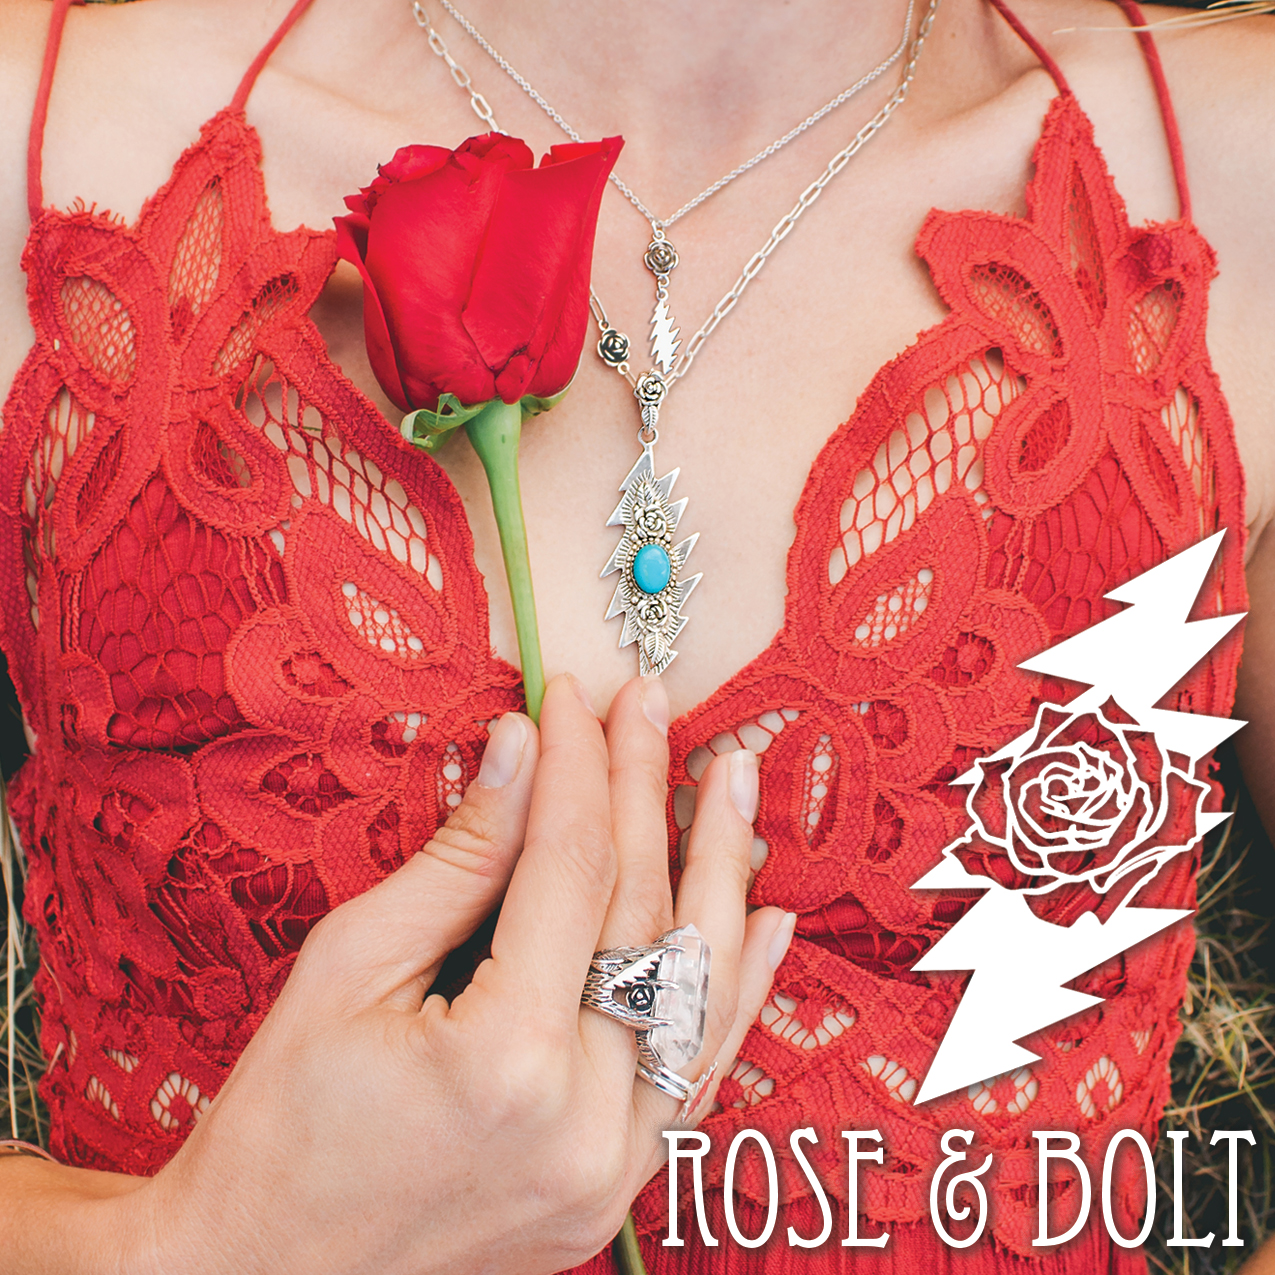 rose and bolt